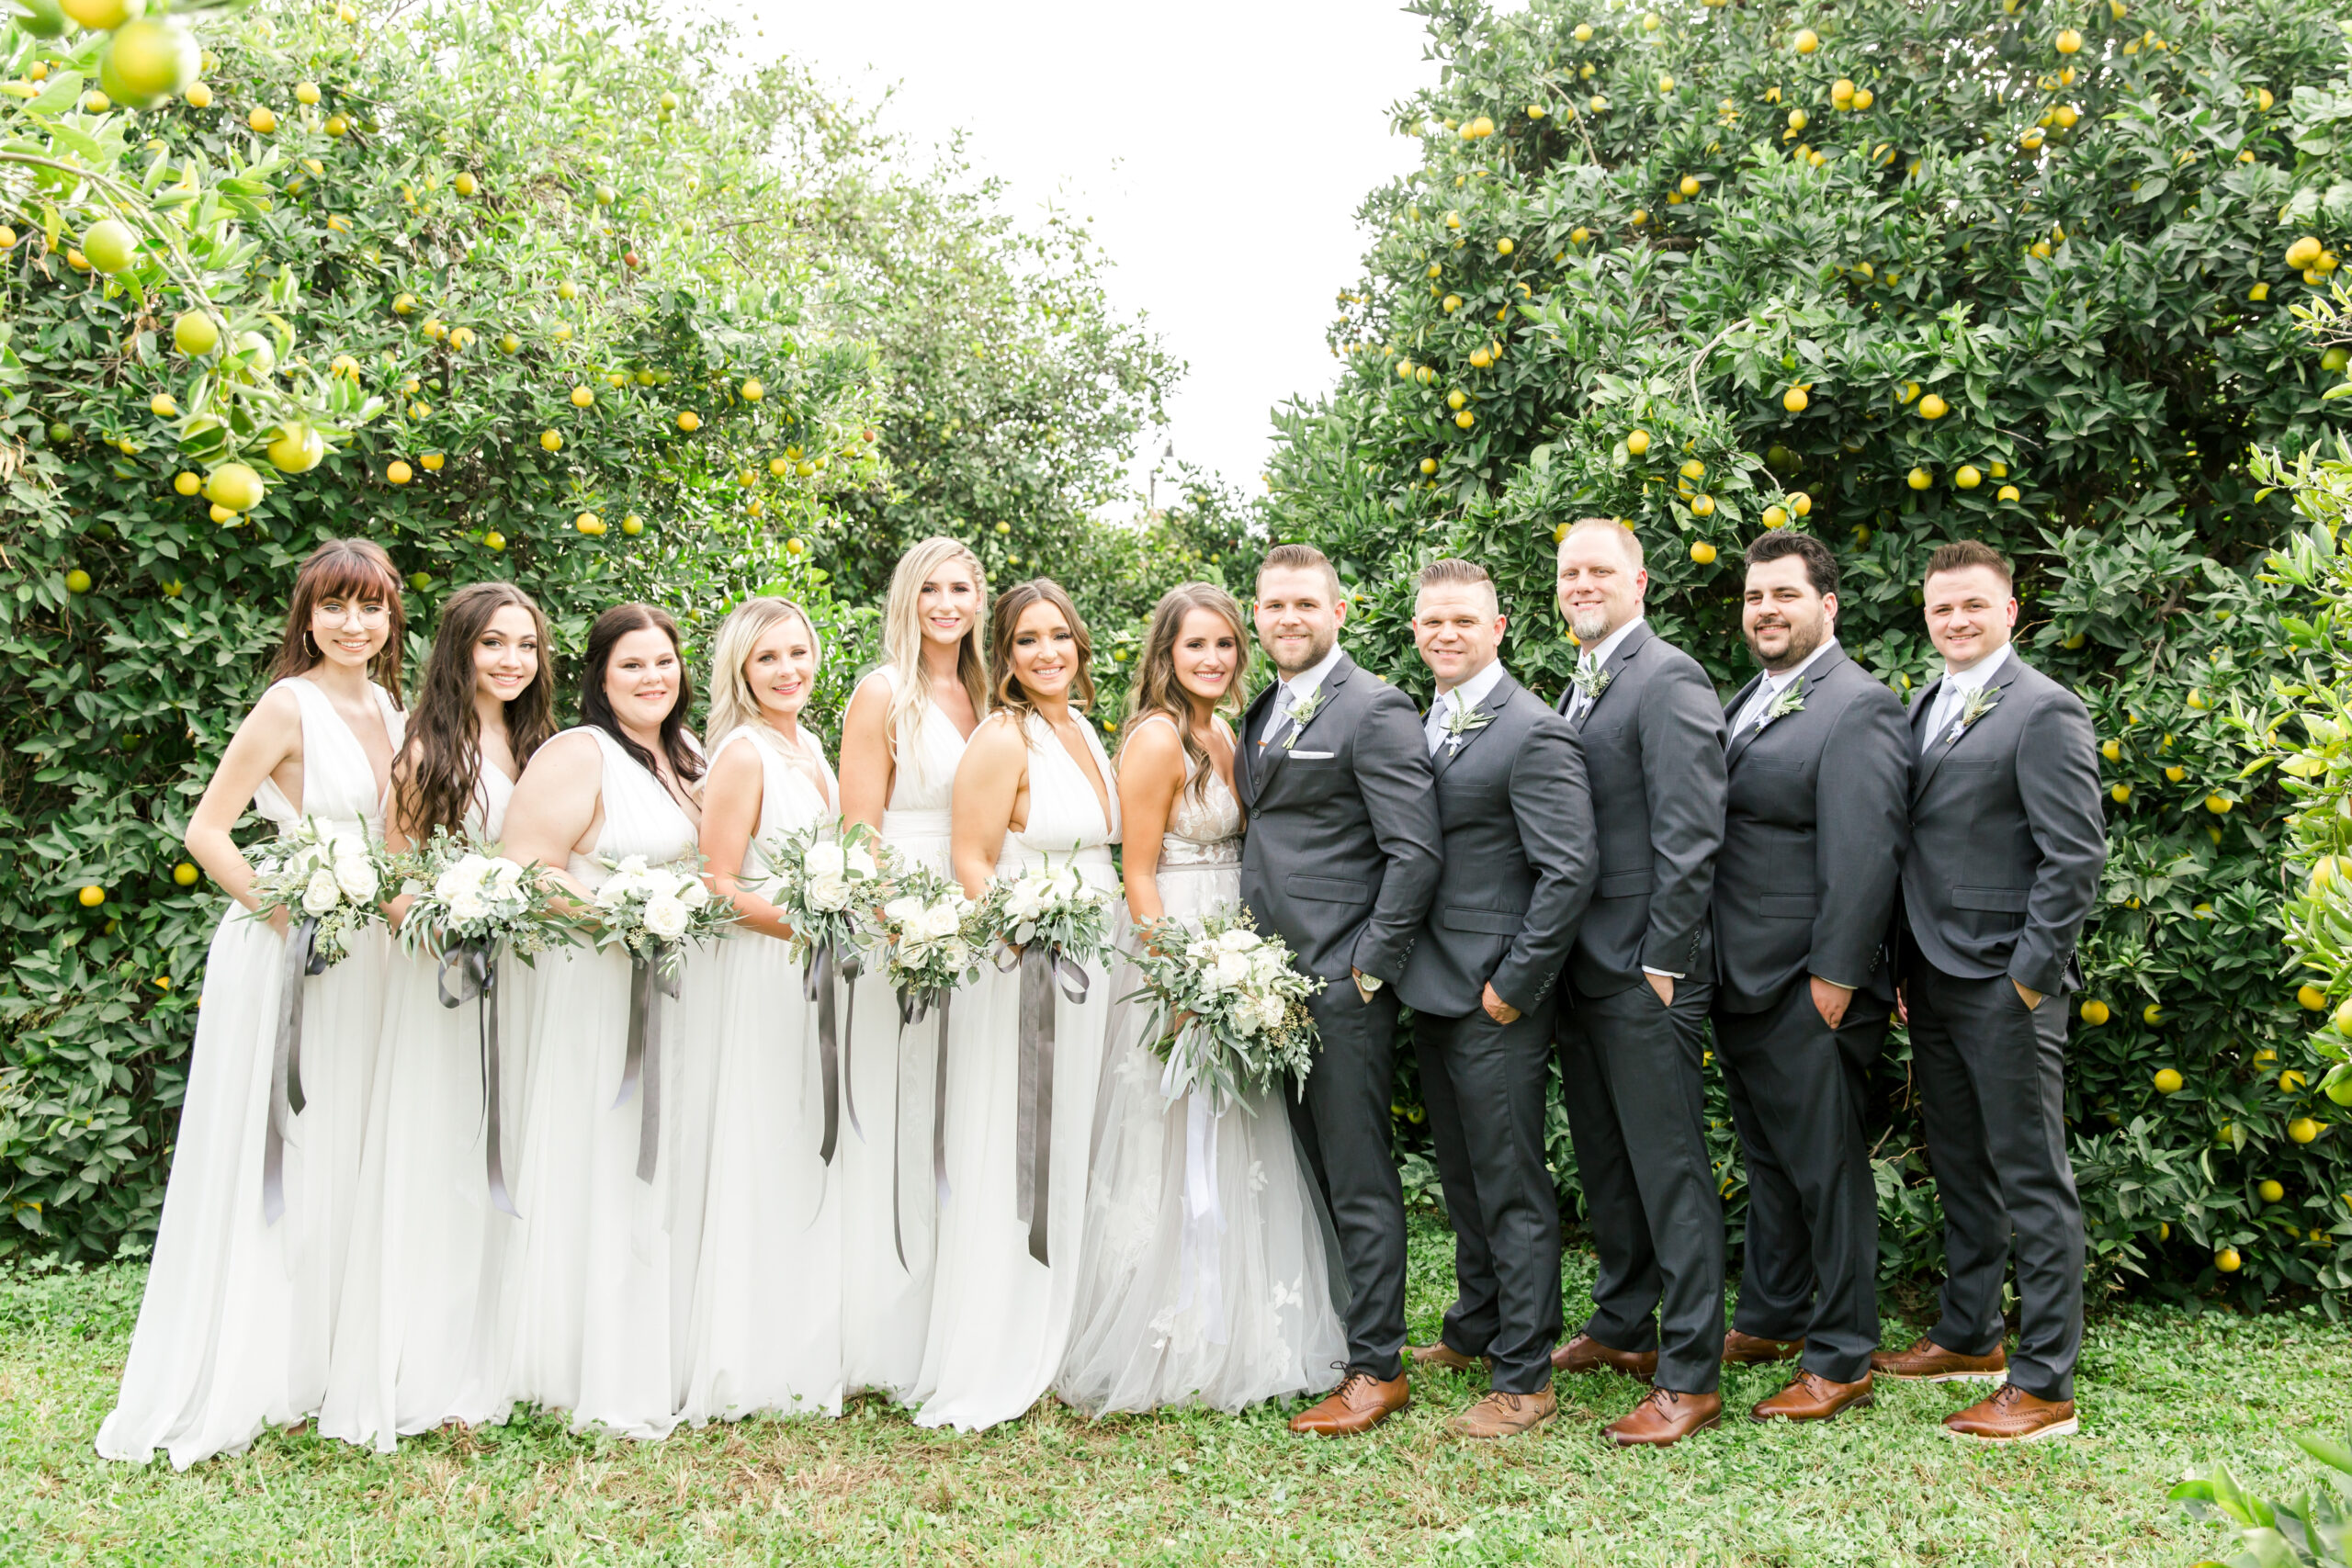 Groom and groomsmen in full frame suits with bride and bridesmaids outside in the greenery